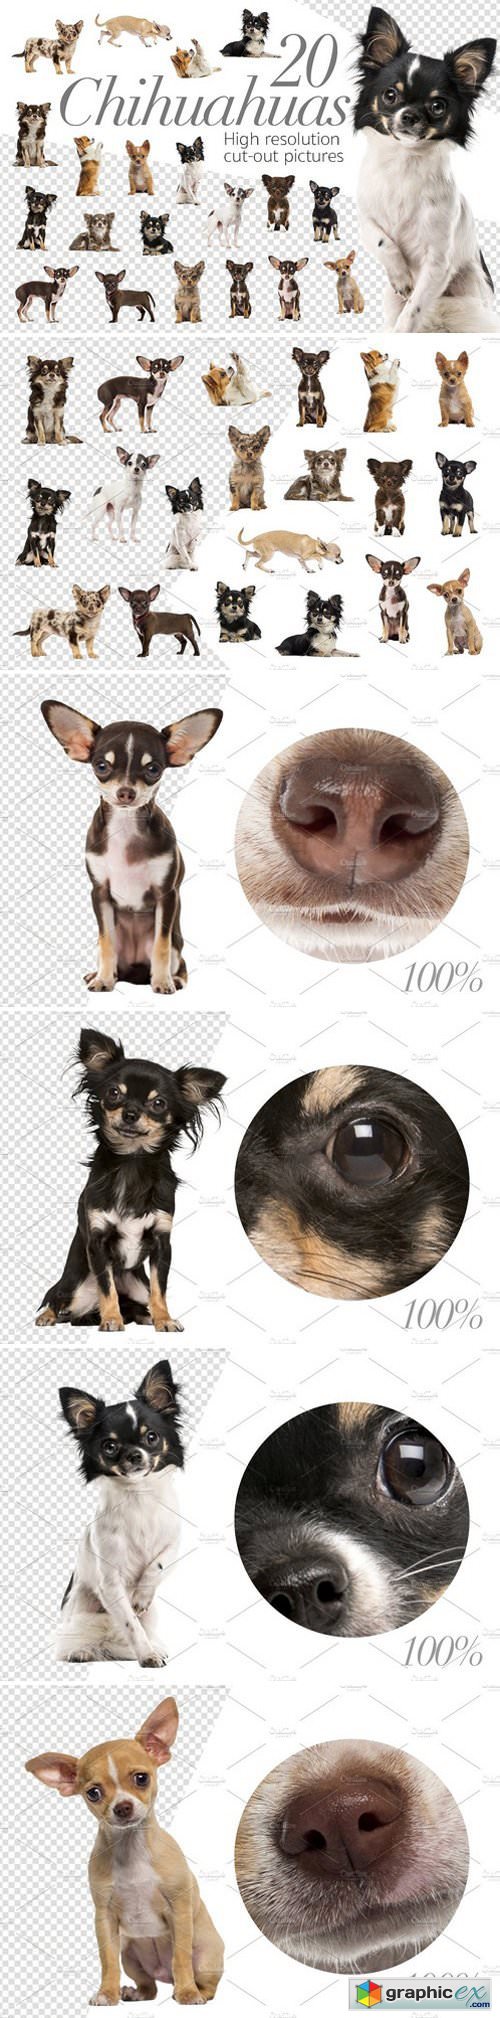 20 Chihuahuas - Cut-out Pictures